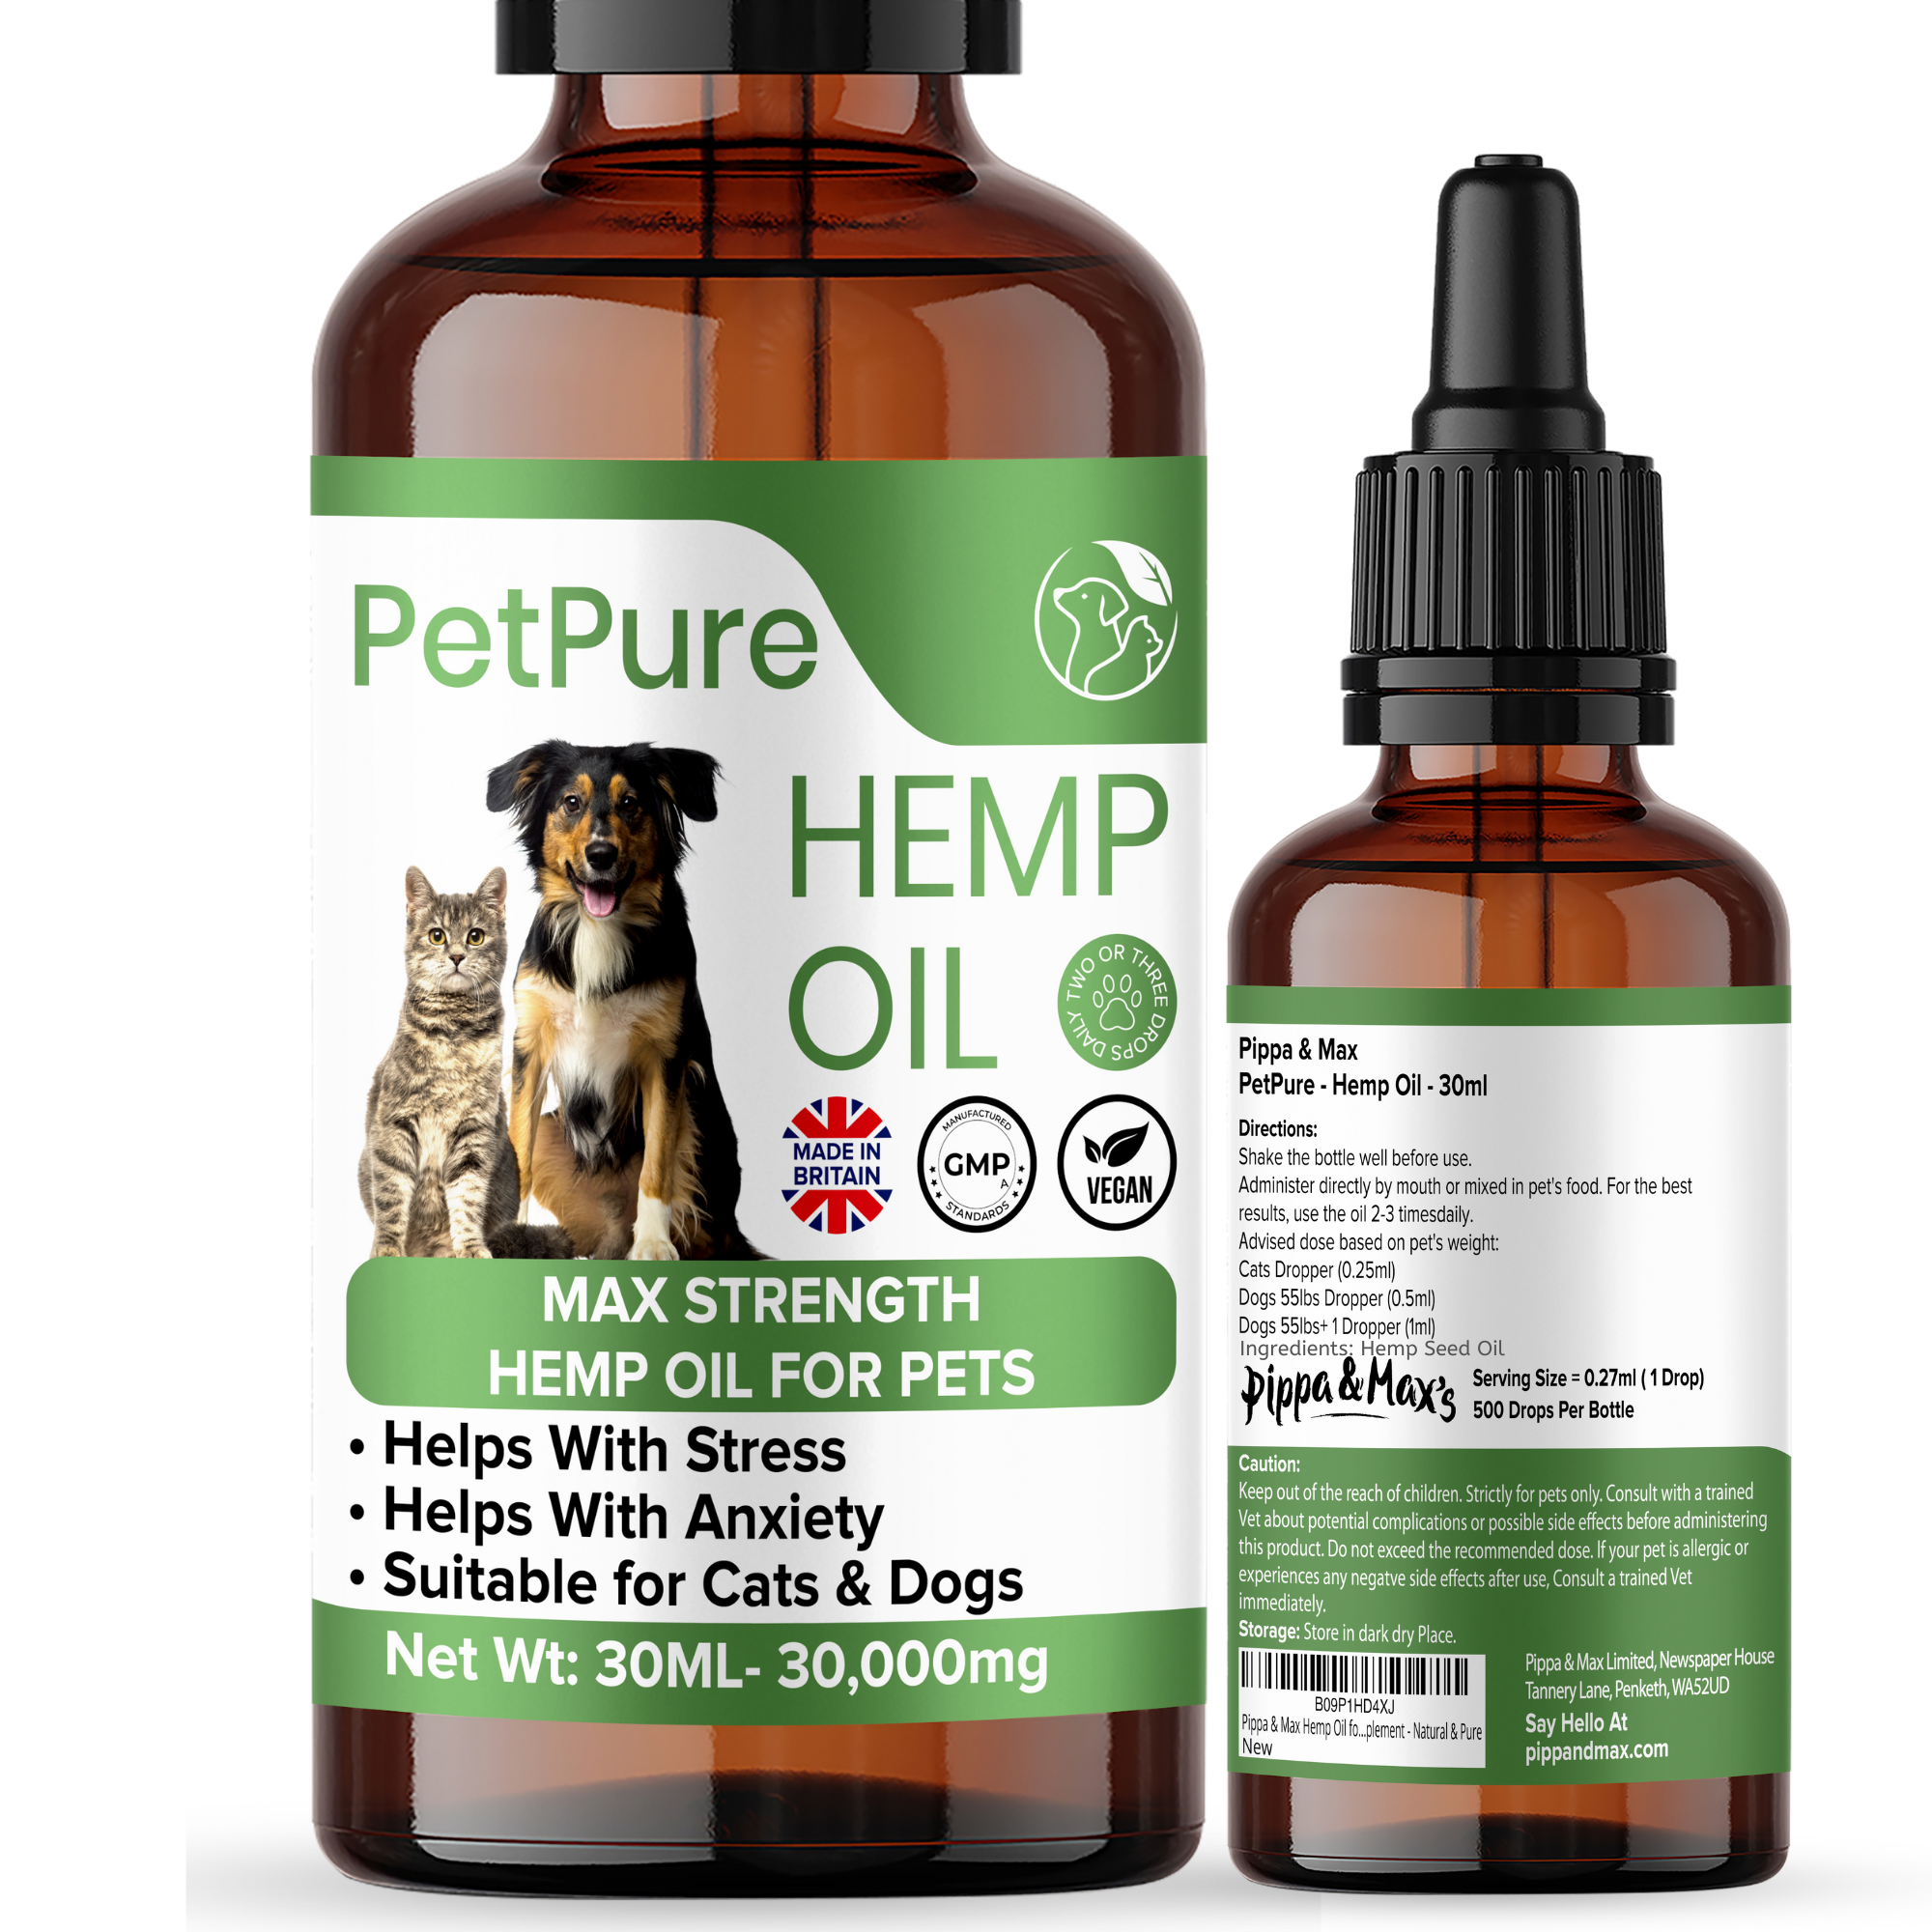 Pippa & Max Hemp Oil for Dogs and Cats & Pets - 30,000MG 30ml – Hemp Extract Made in the UK - Hip & Joint Supplement - Natural & Pure